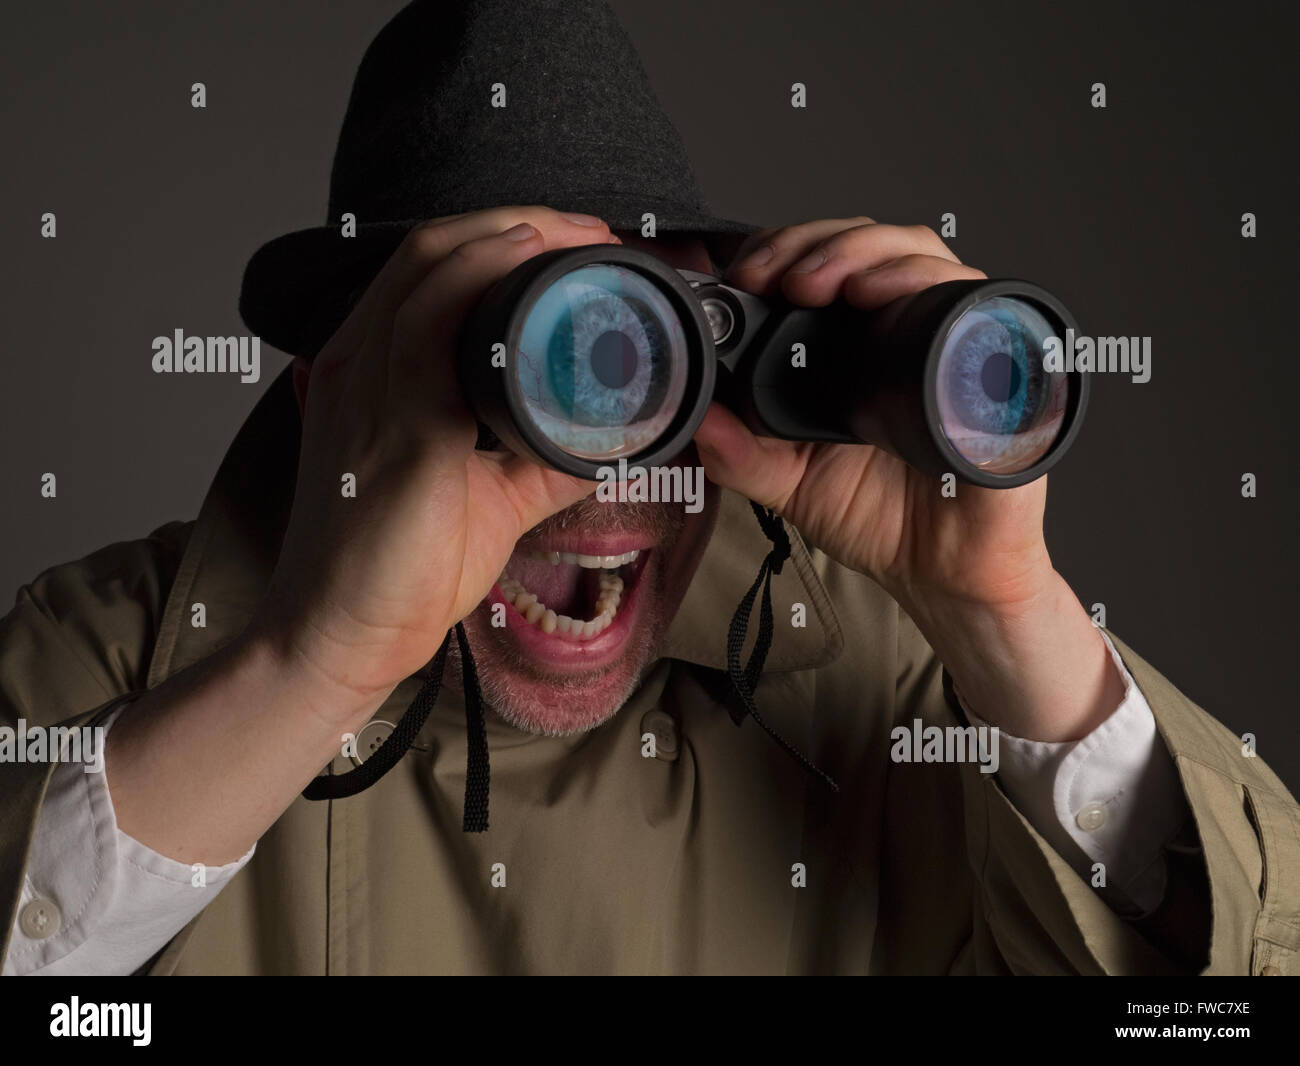 Photograph of a man in trench coat and hat looking through binoculars with huge, cartoonish eyes seen in the lenses. Stock Photo